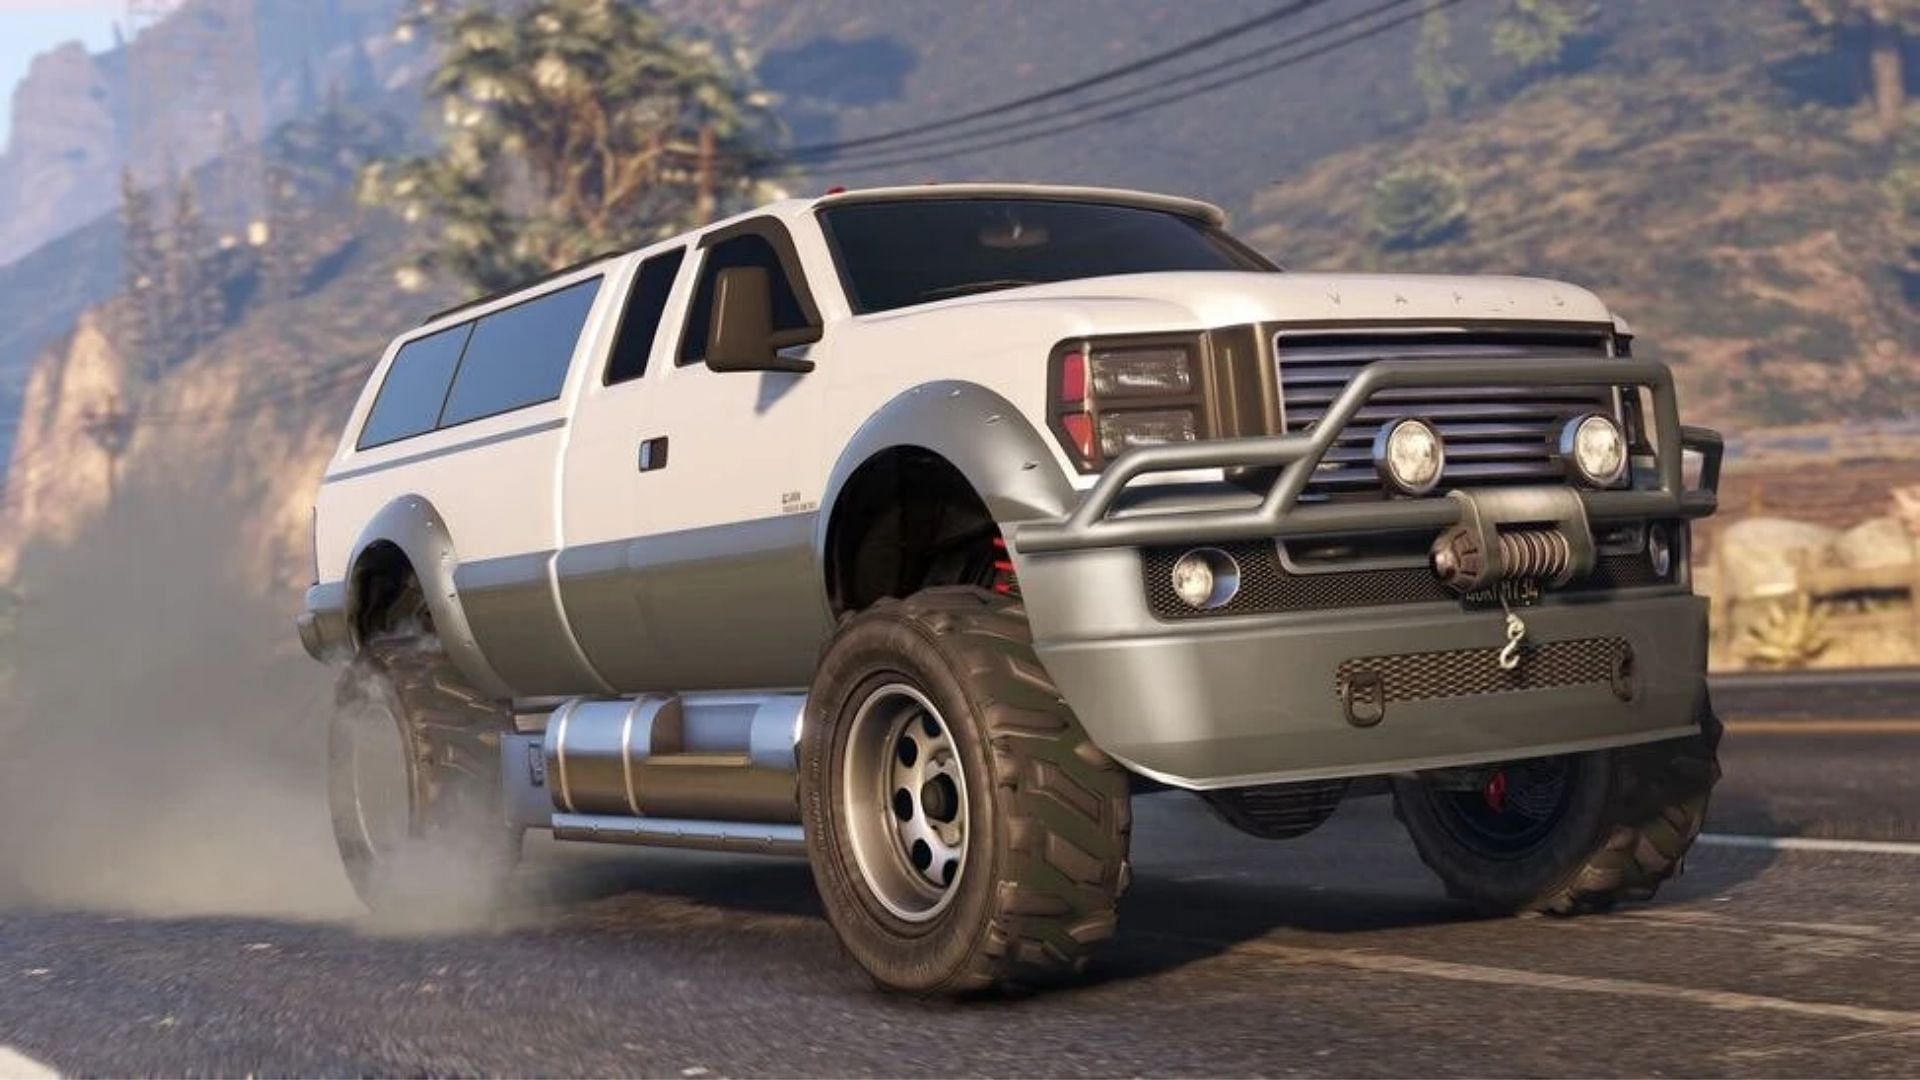 A fully customized Vapid Sandking SWB in Grand Theft Auto 5 Online (Image via Rockstar Games)